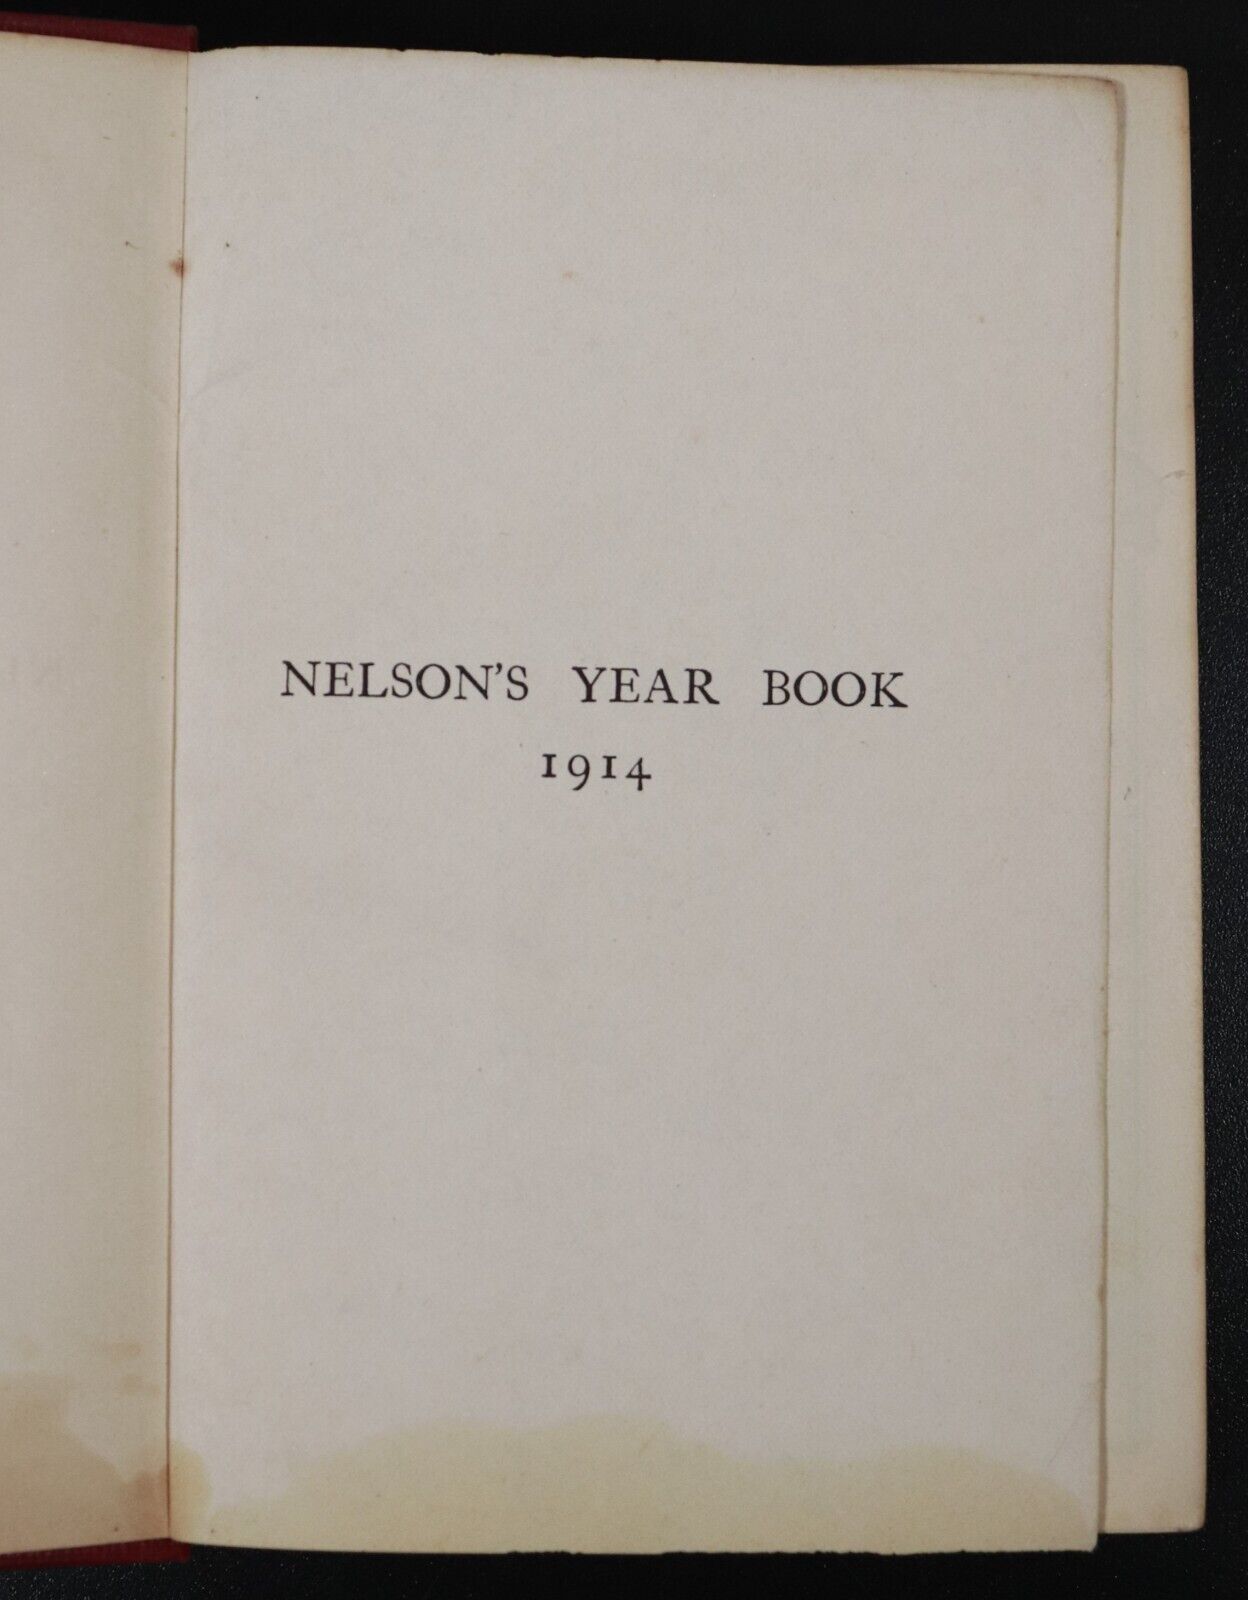 1914Thomas Nelson's Year Book for 1913-14 Antique British History Book Map - 0